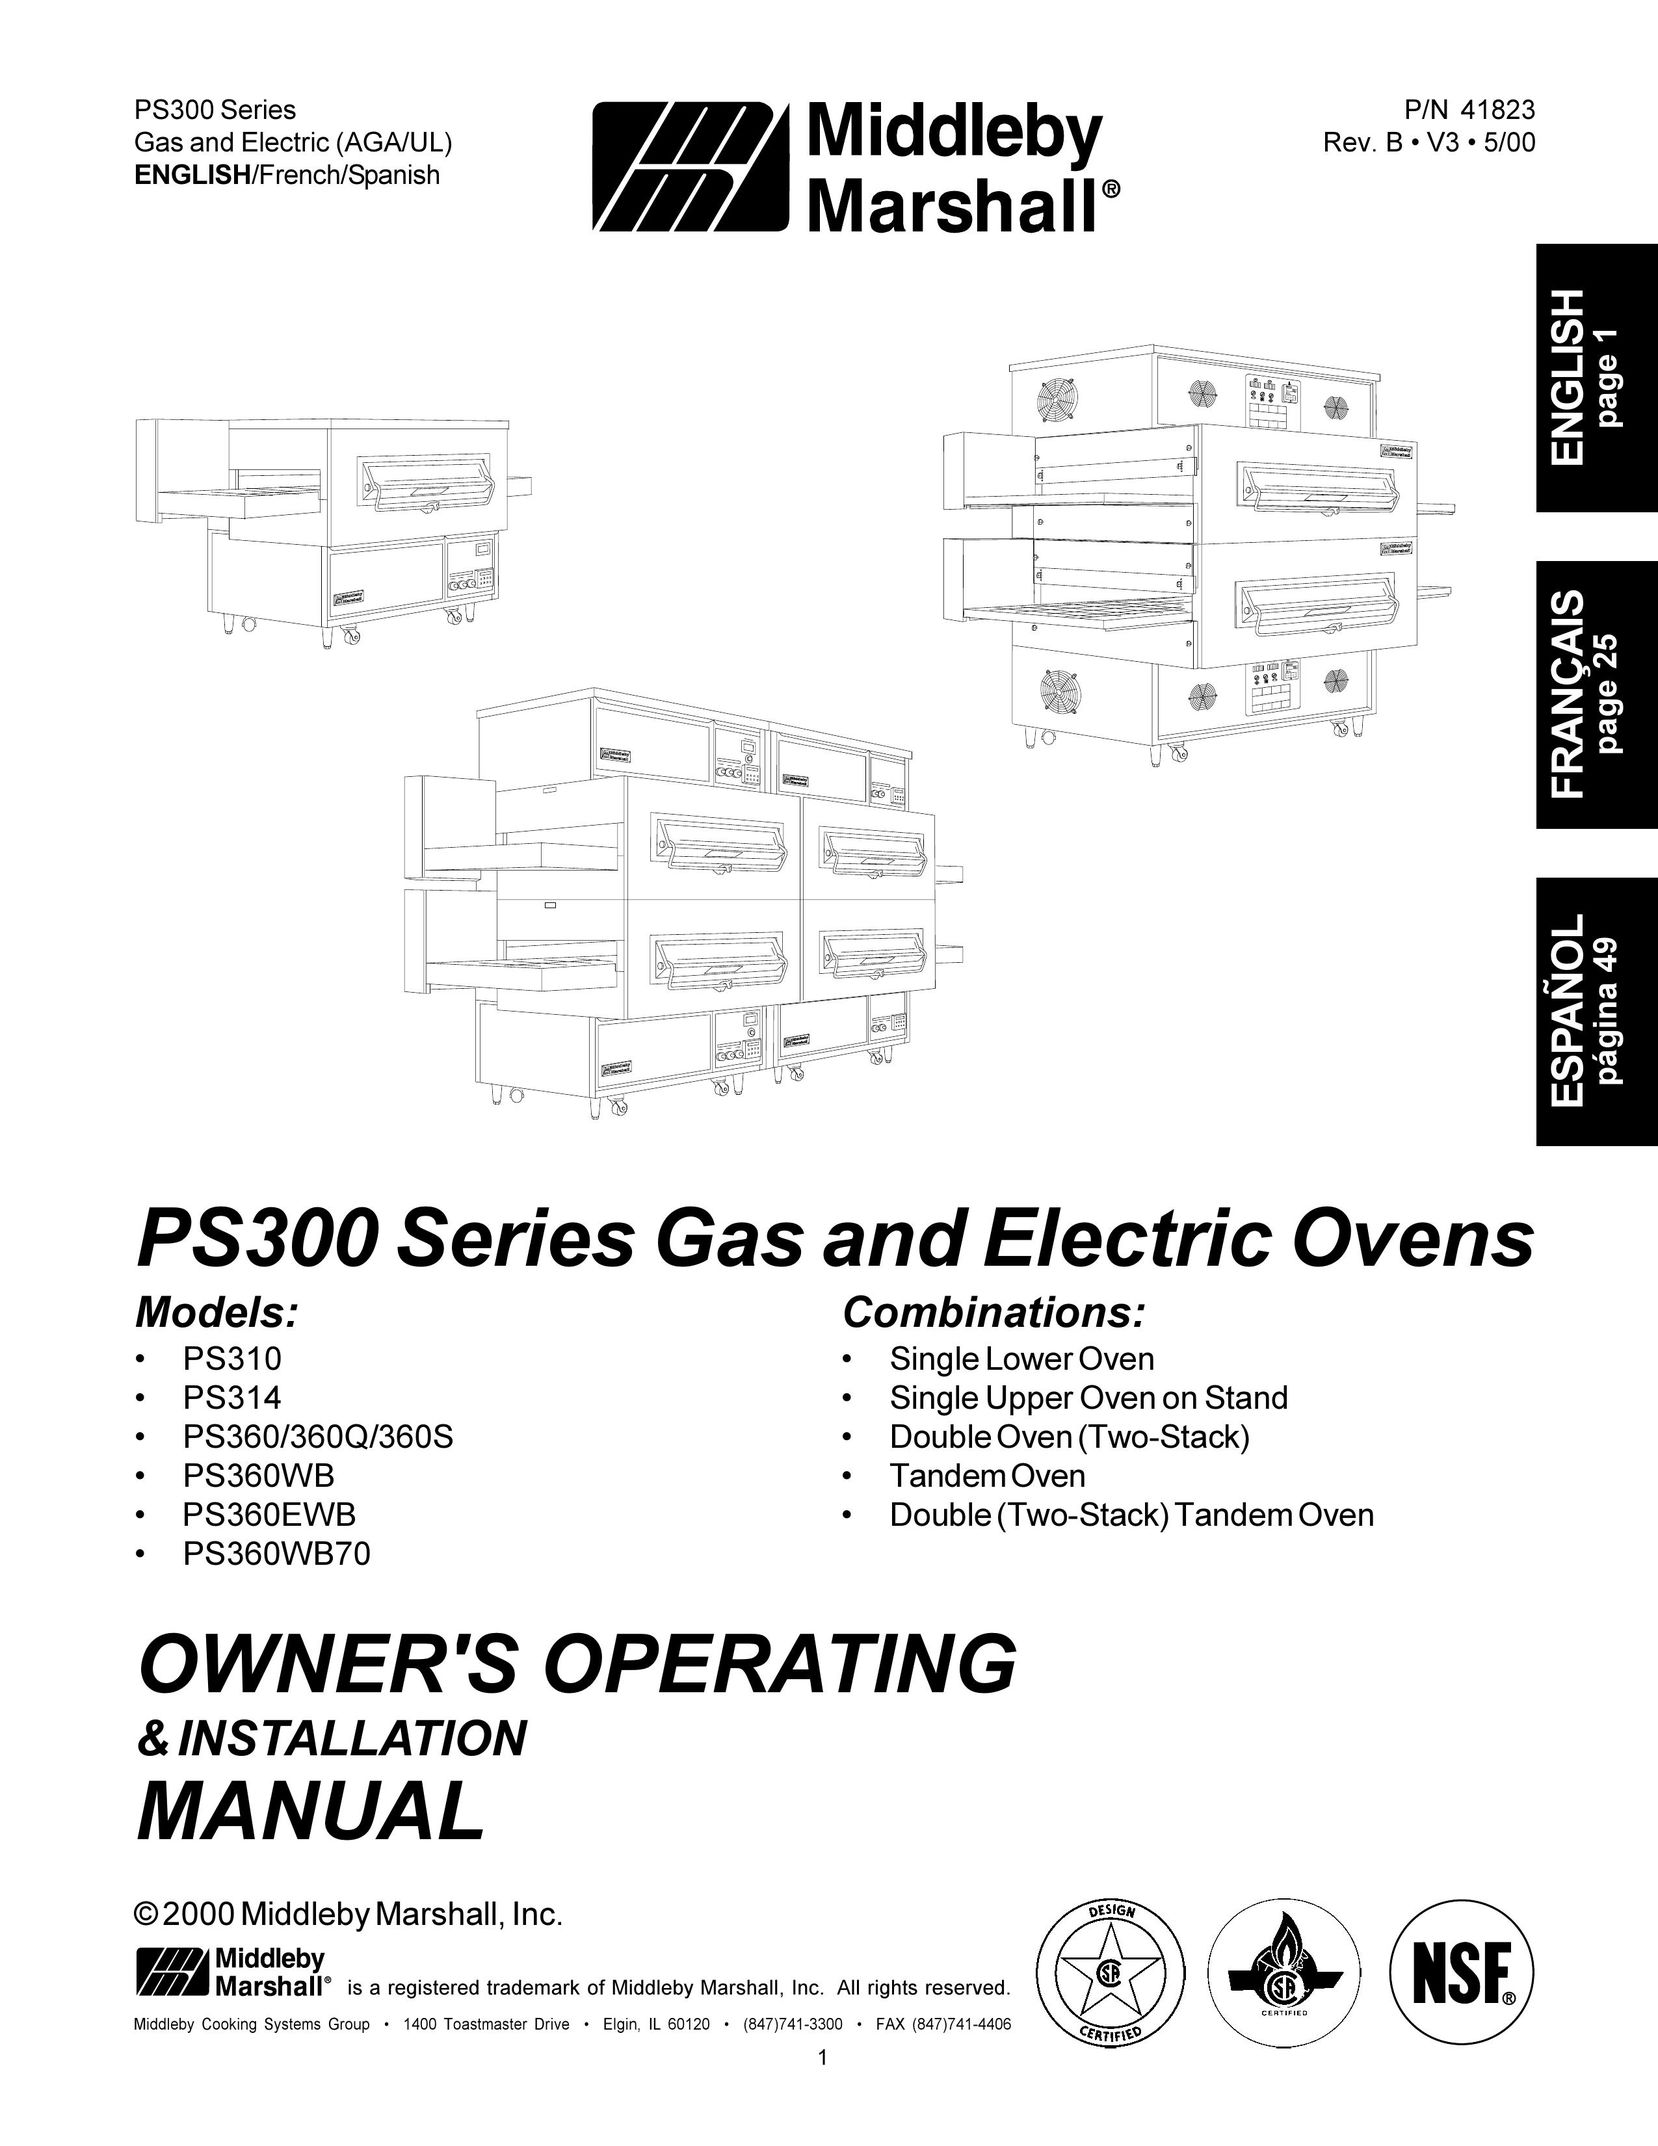 Middleby Marshall PS300F Oven User Manual